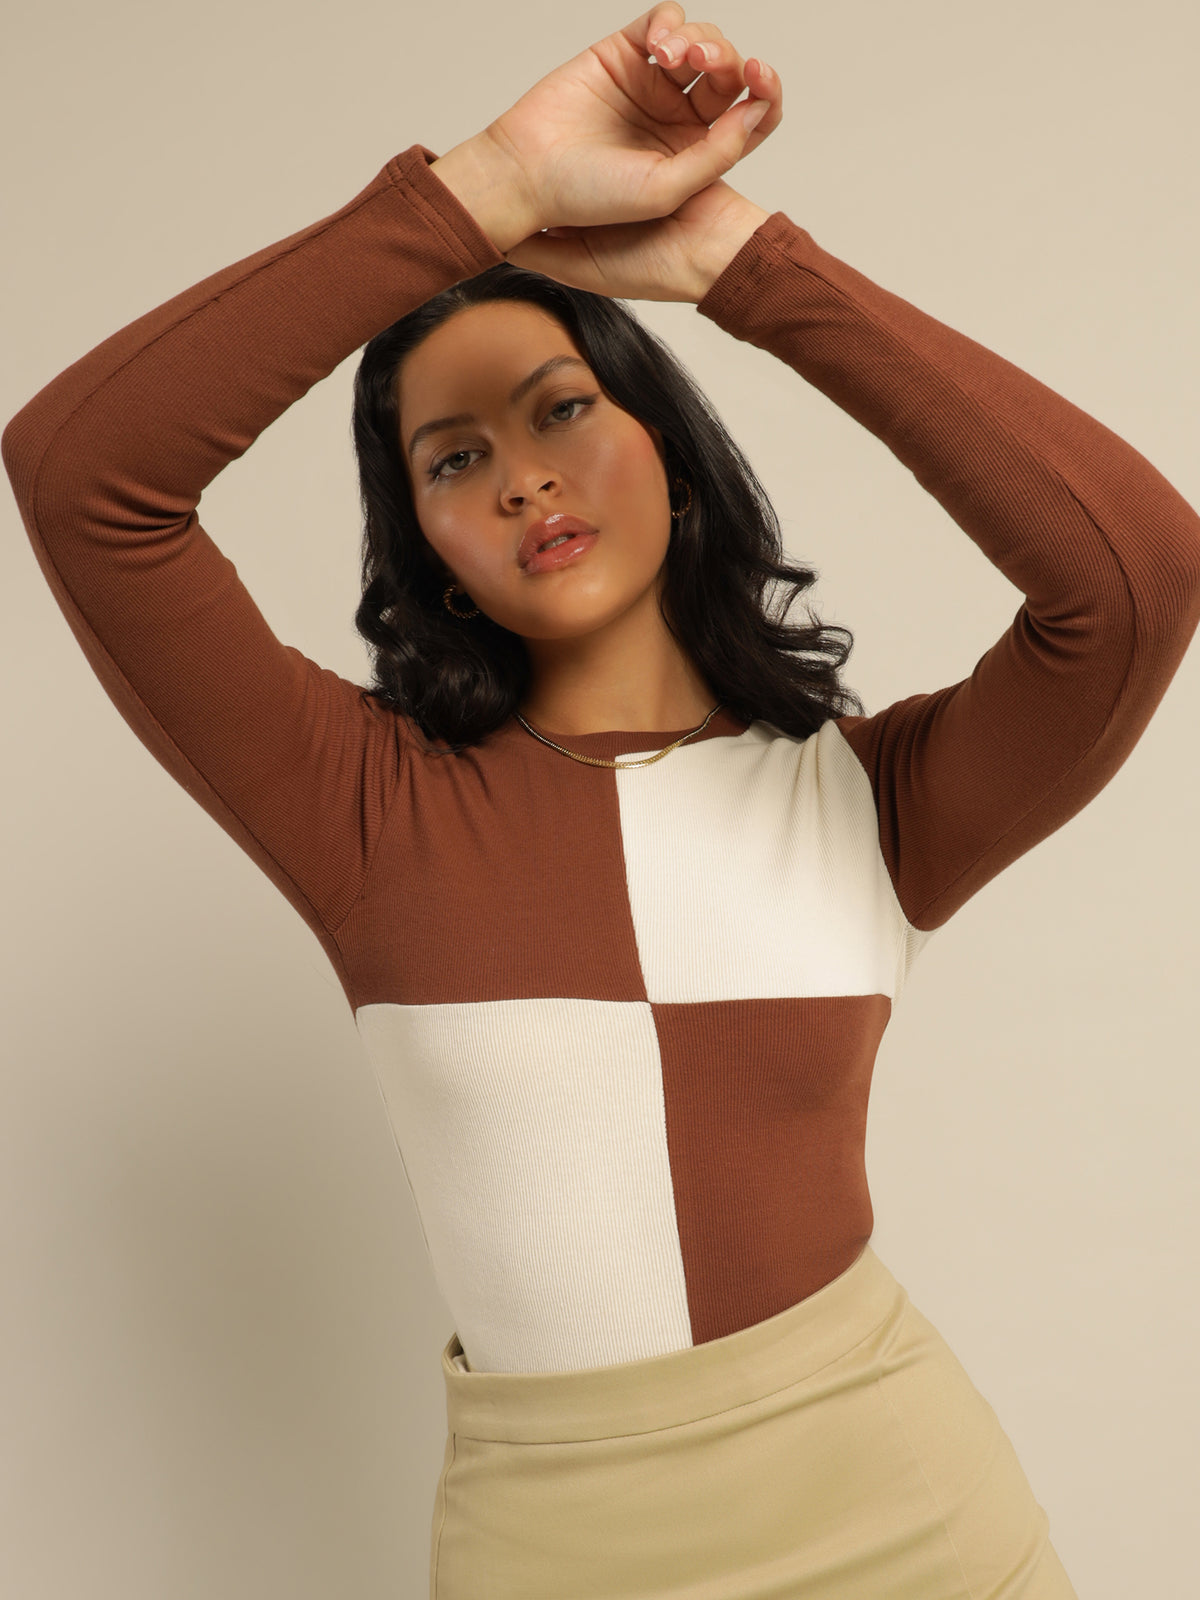 Lyric Patchwork Top in Brown &amp; Cream Check